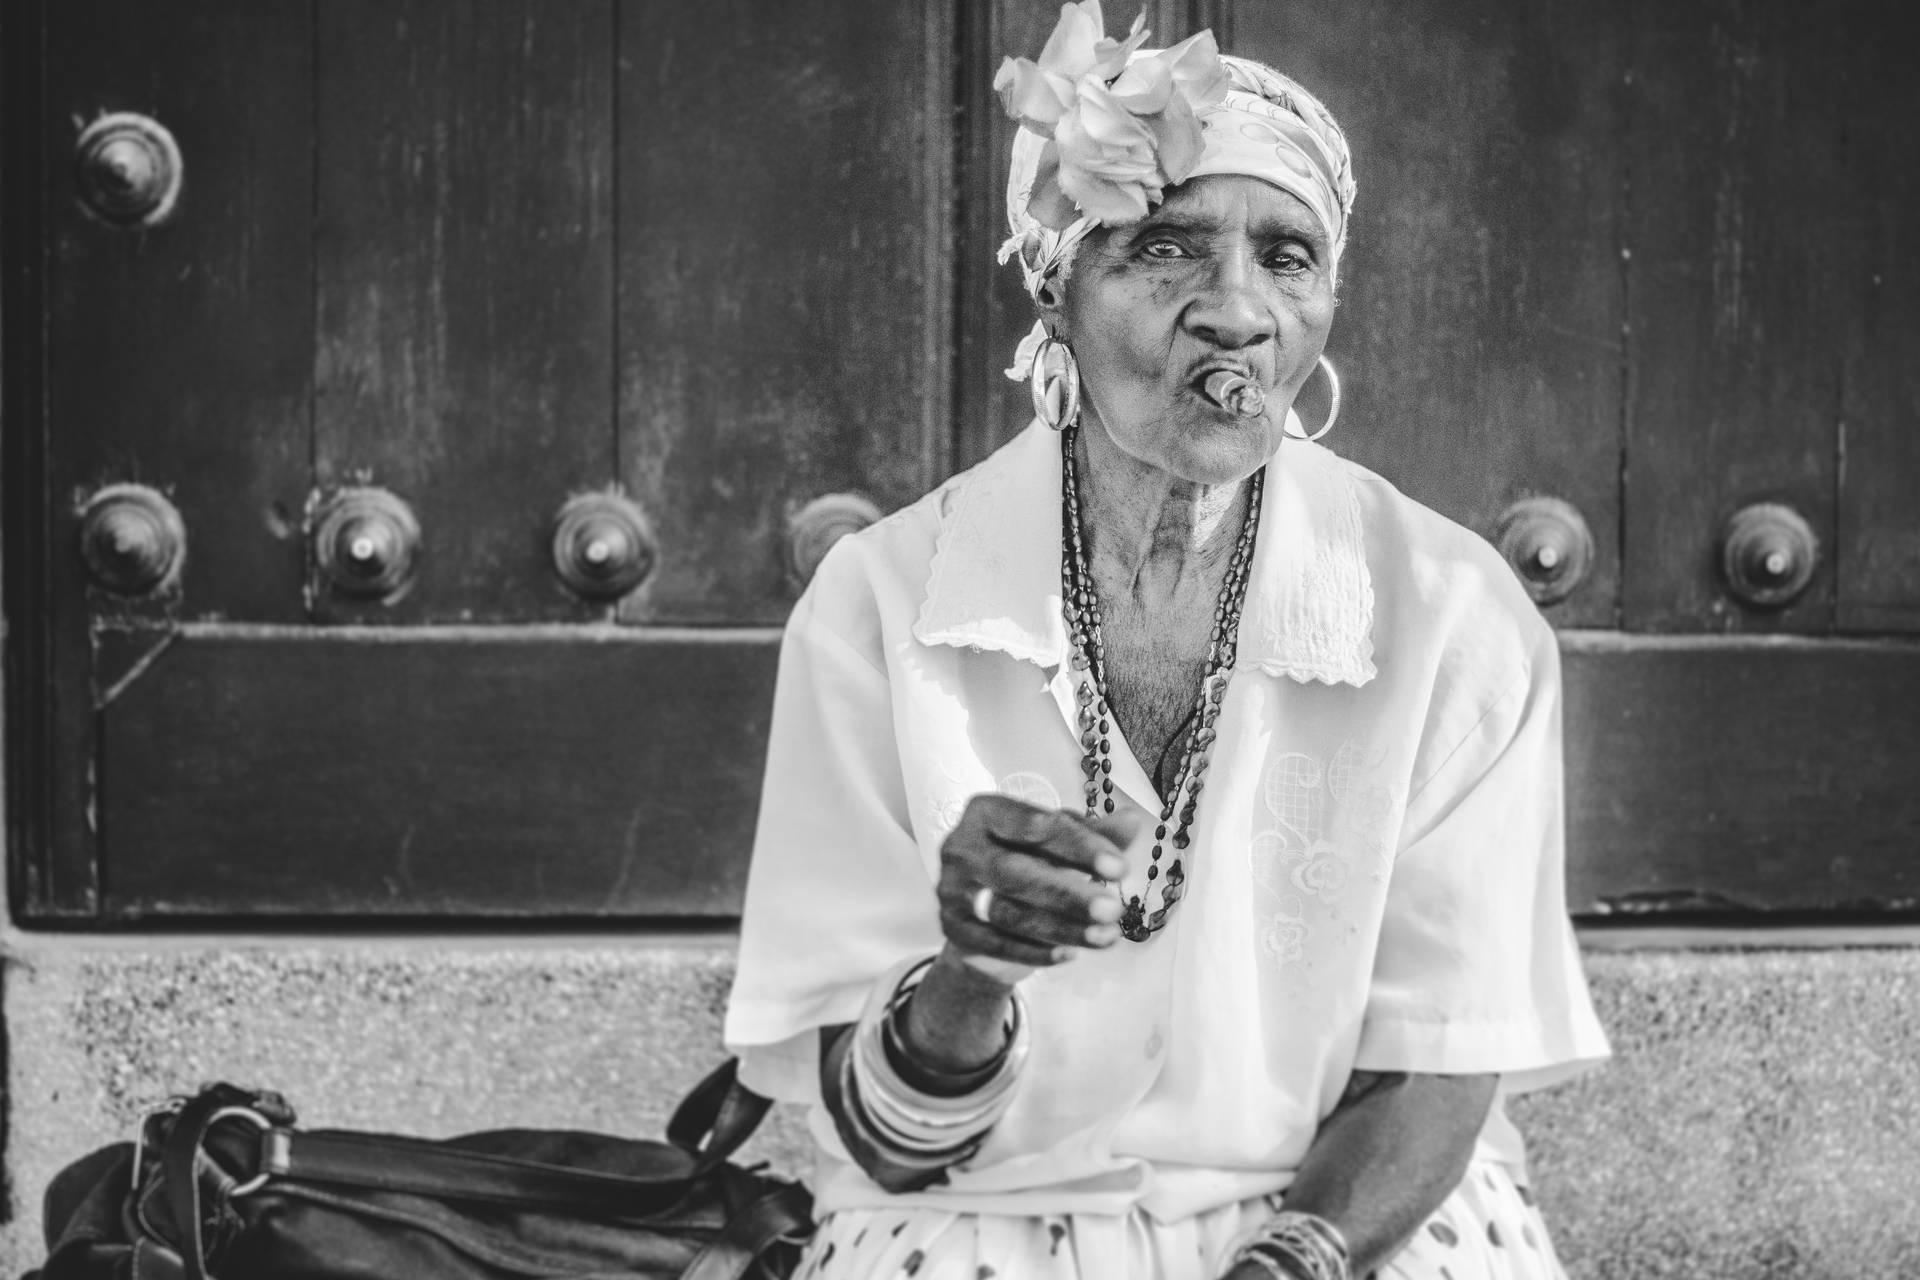 Cuban Elderly Woman With Cigarette Background